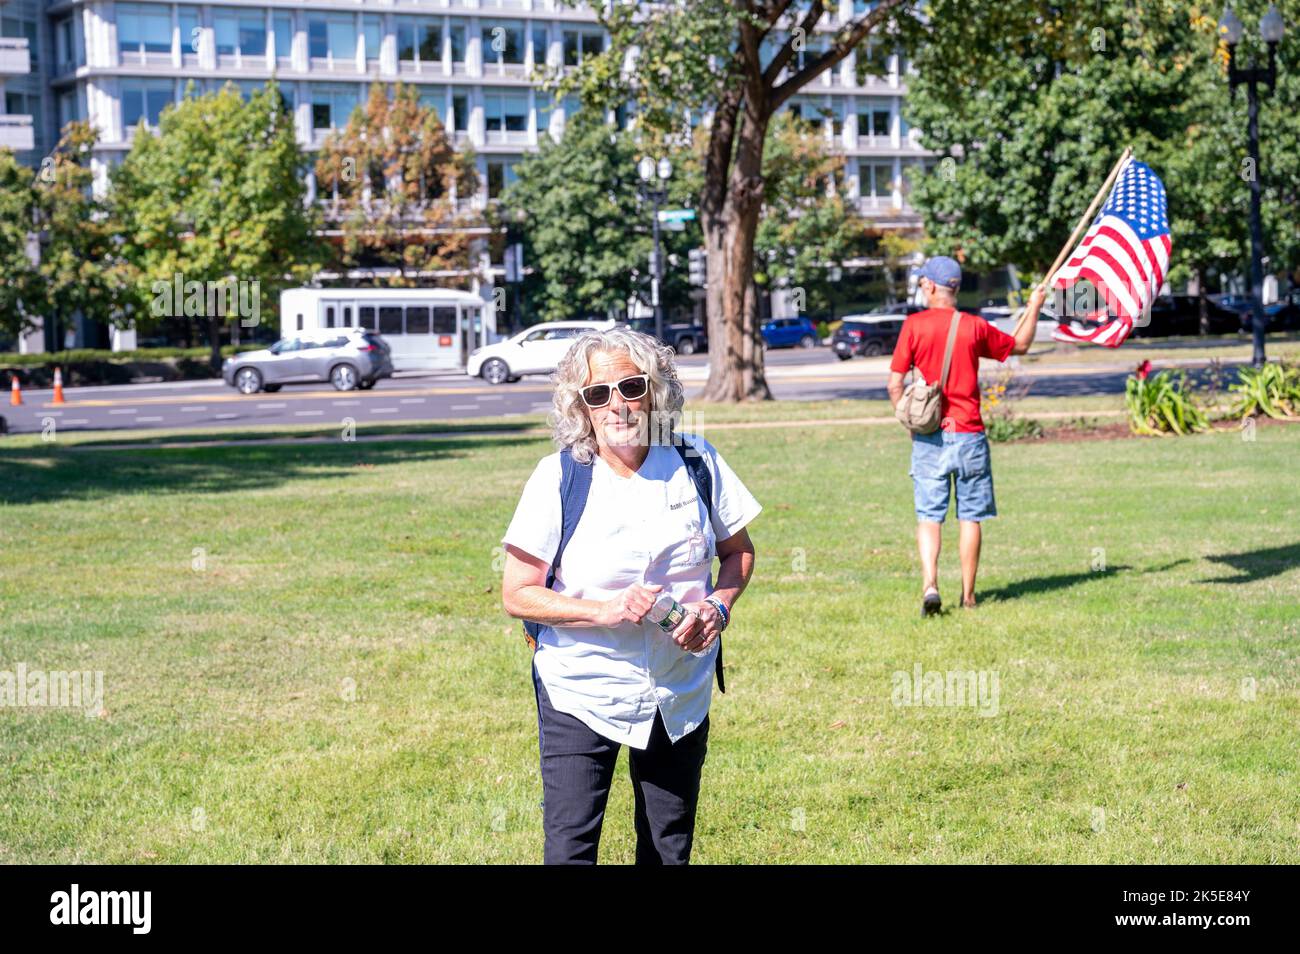 Washington, USA. 07th Oct, 2022. Micki Witthoeft, the mother of Ashli Babbitt, listens to speeches as supporters of President Trump gather near the U.S. Capitol to demonstrate against what they claim is tyranny on October 7, 2022 in Washington, DC (Photo by Matthew Rodier/Sipa USA) Credit: Sipa USA/Alamy Live News Stock Photo